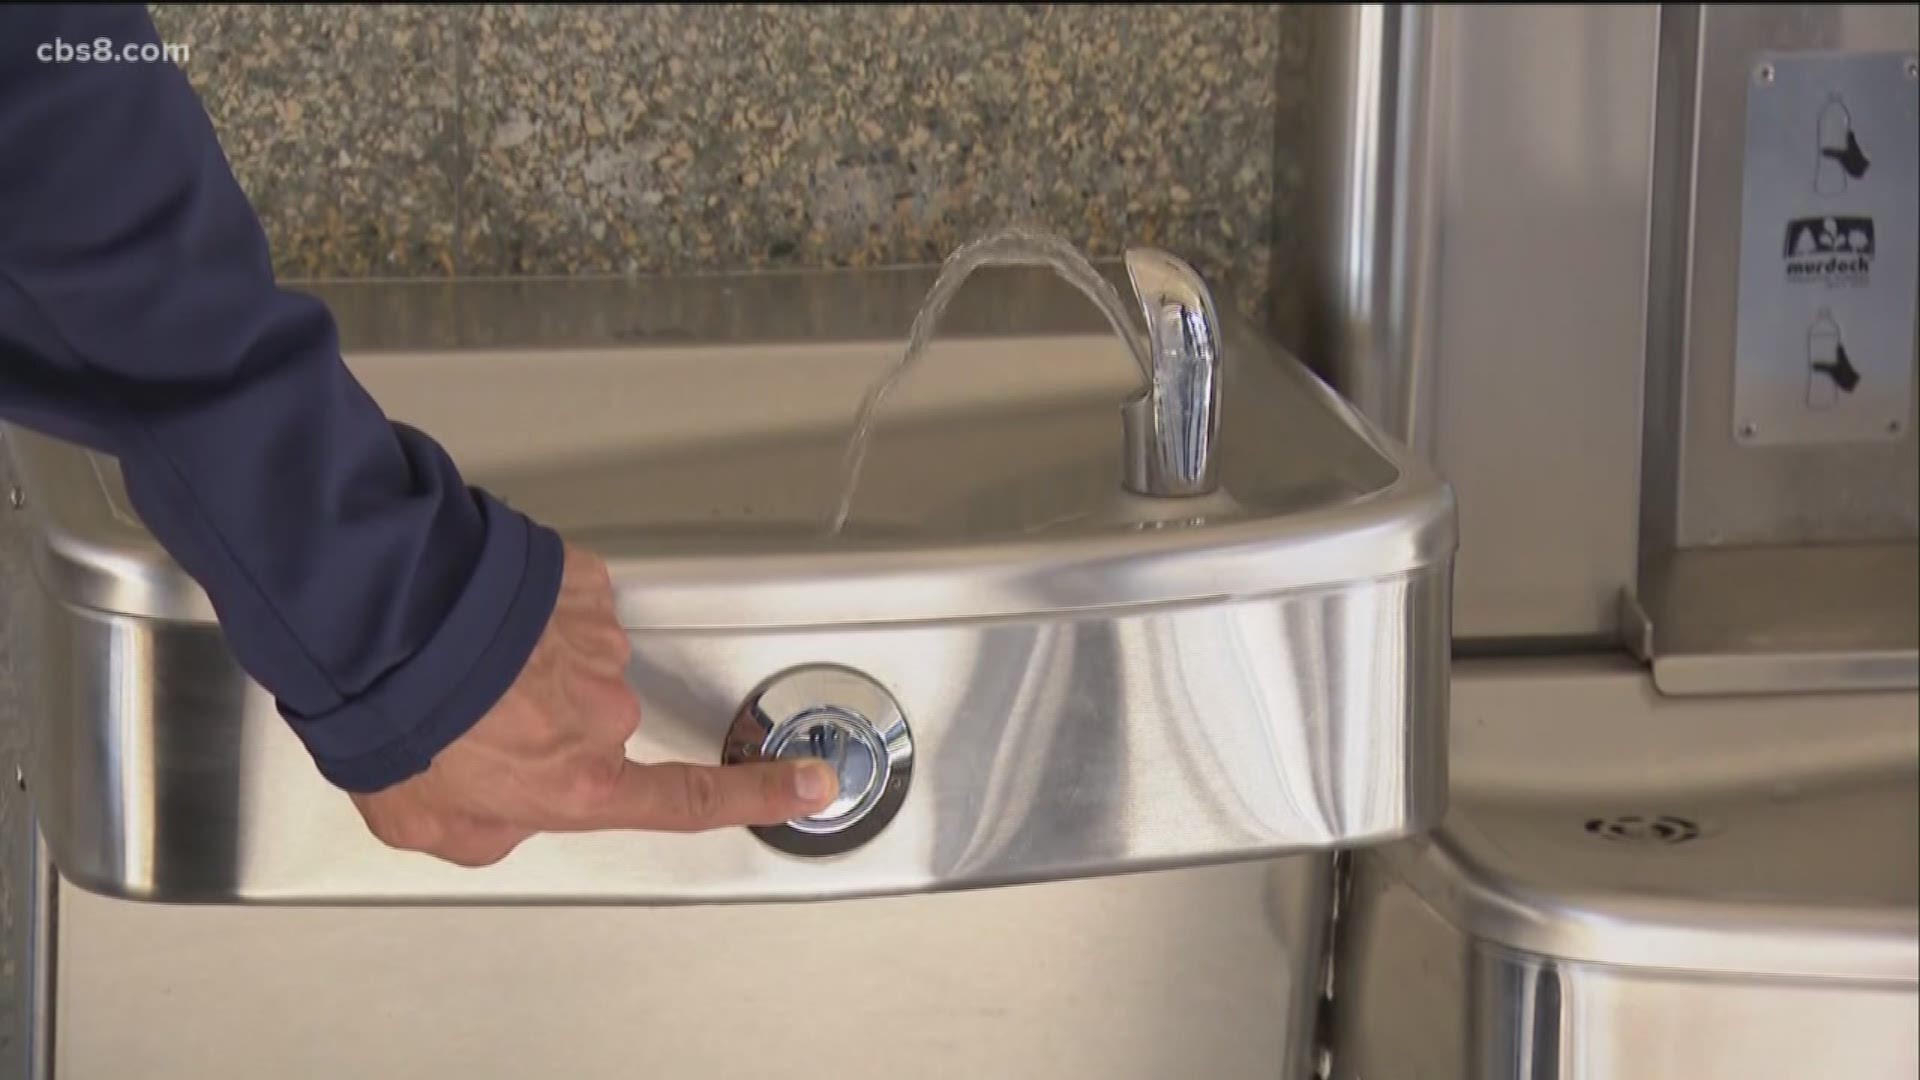 The new plan calls for providing drinking water districtwide solely through filtered hydration stations.